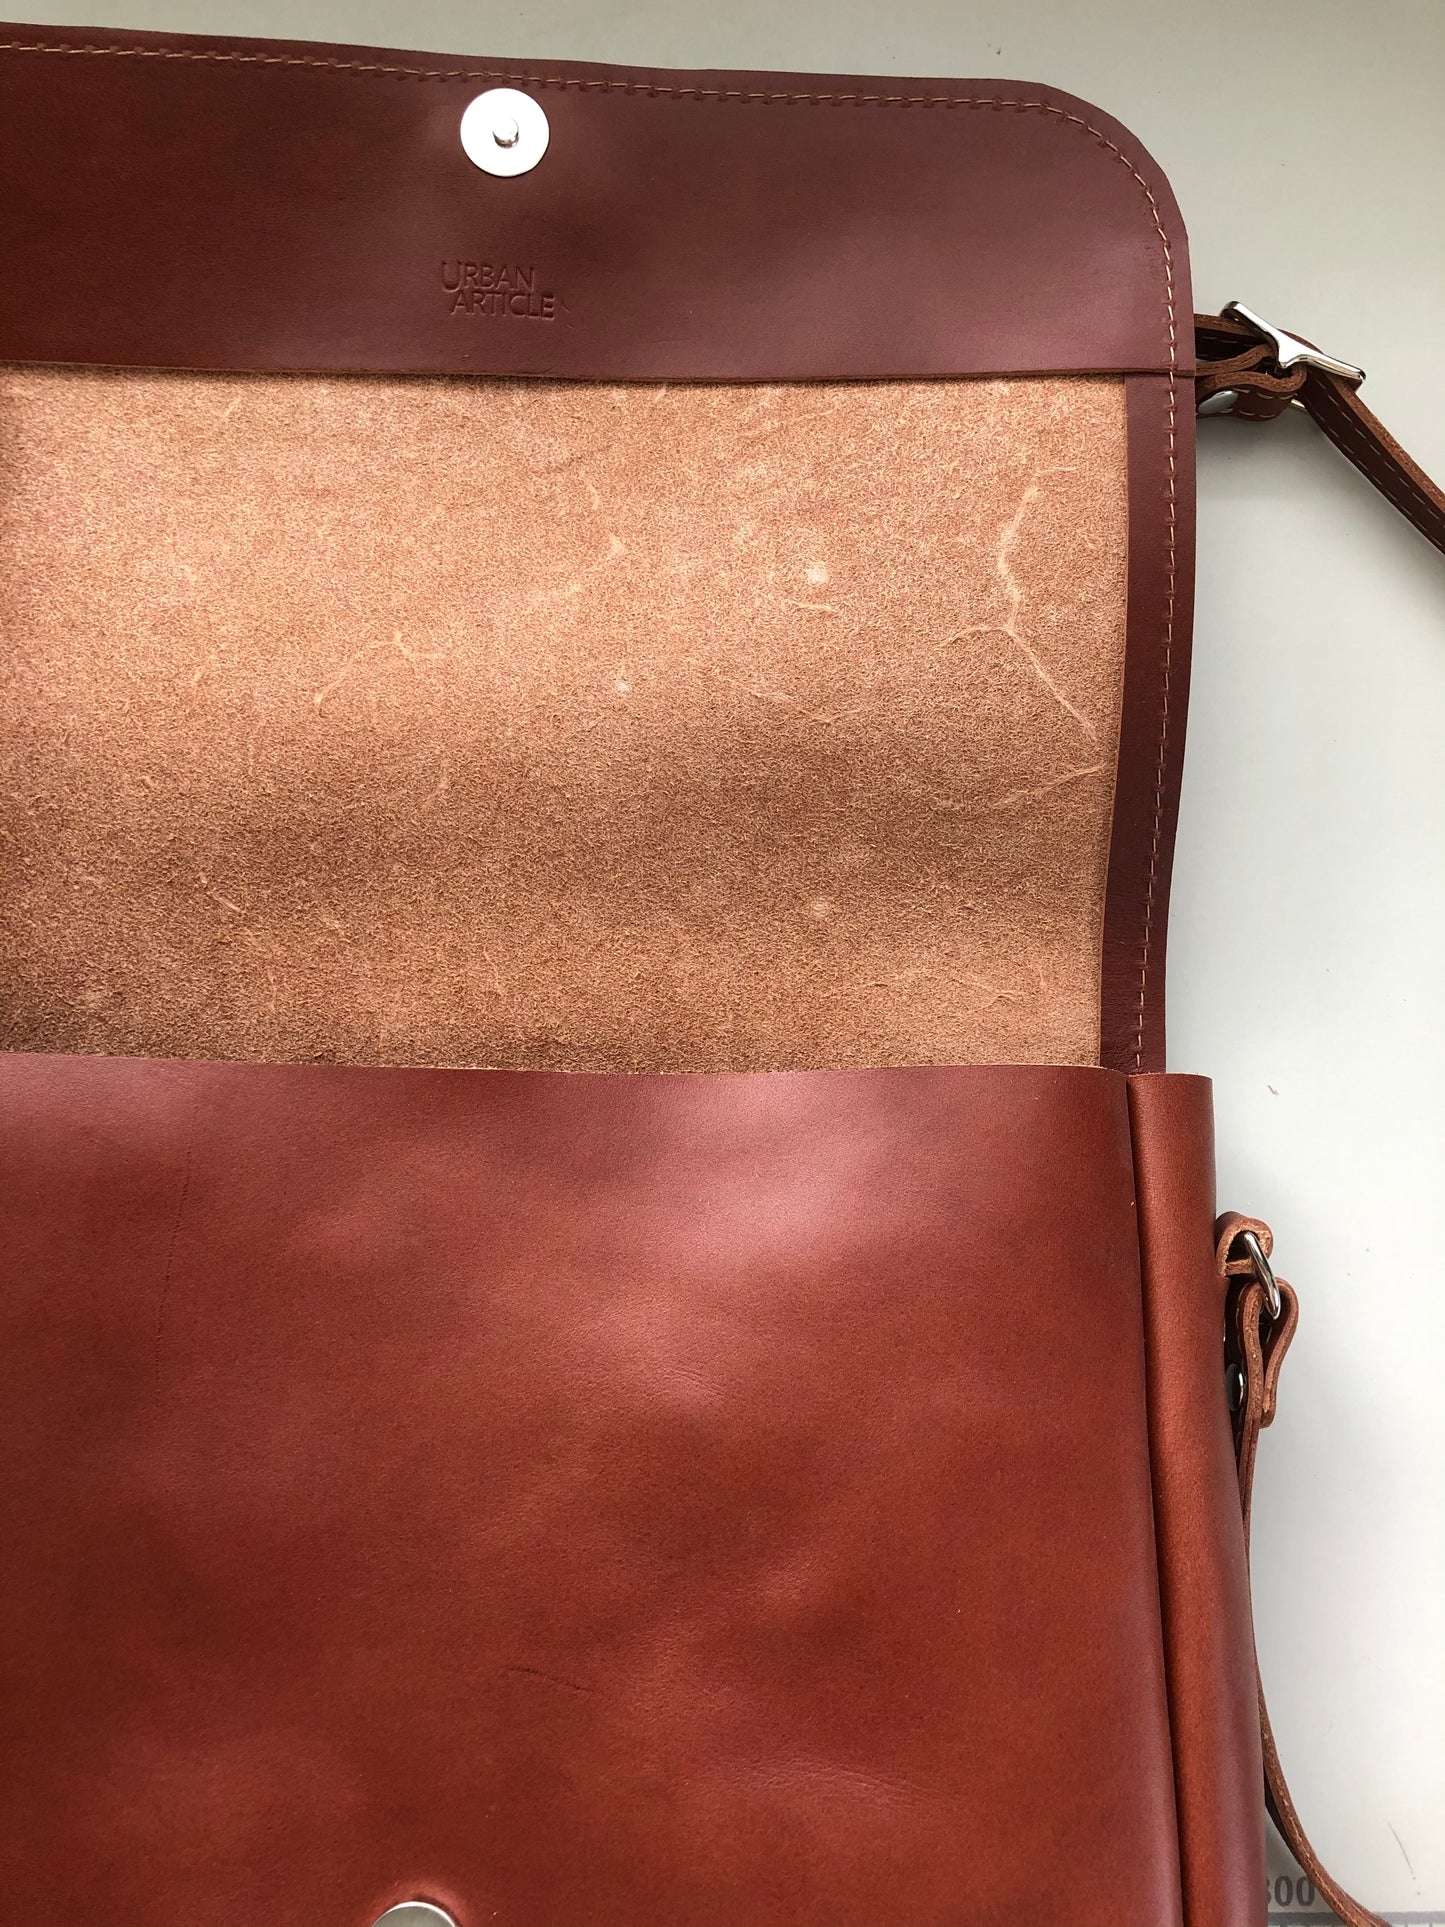 View of interior of rich brown leather bag.